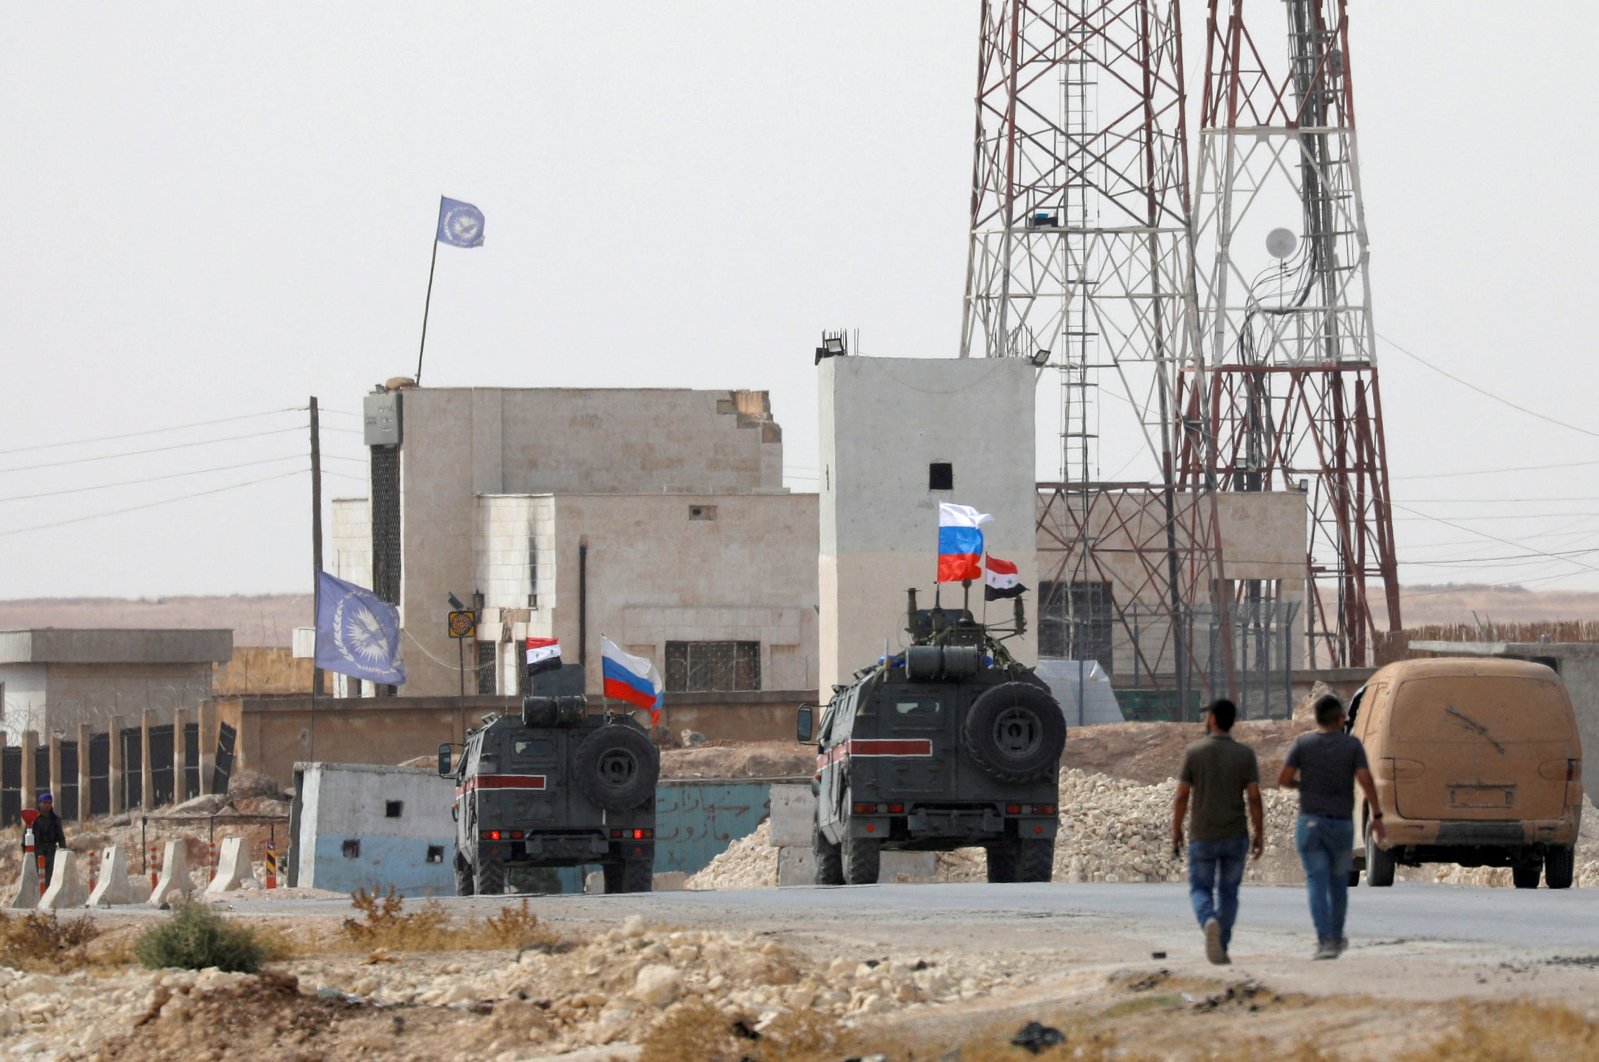 Russian national flags flutter on military vehicles near Manbij, Syria, October 15, 2019. REUTERS/Omar Sanadiki/File Photo